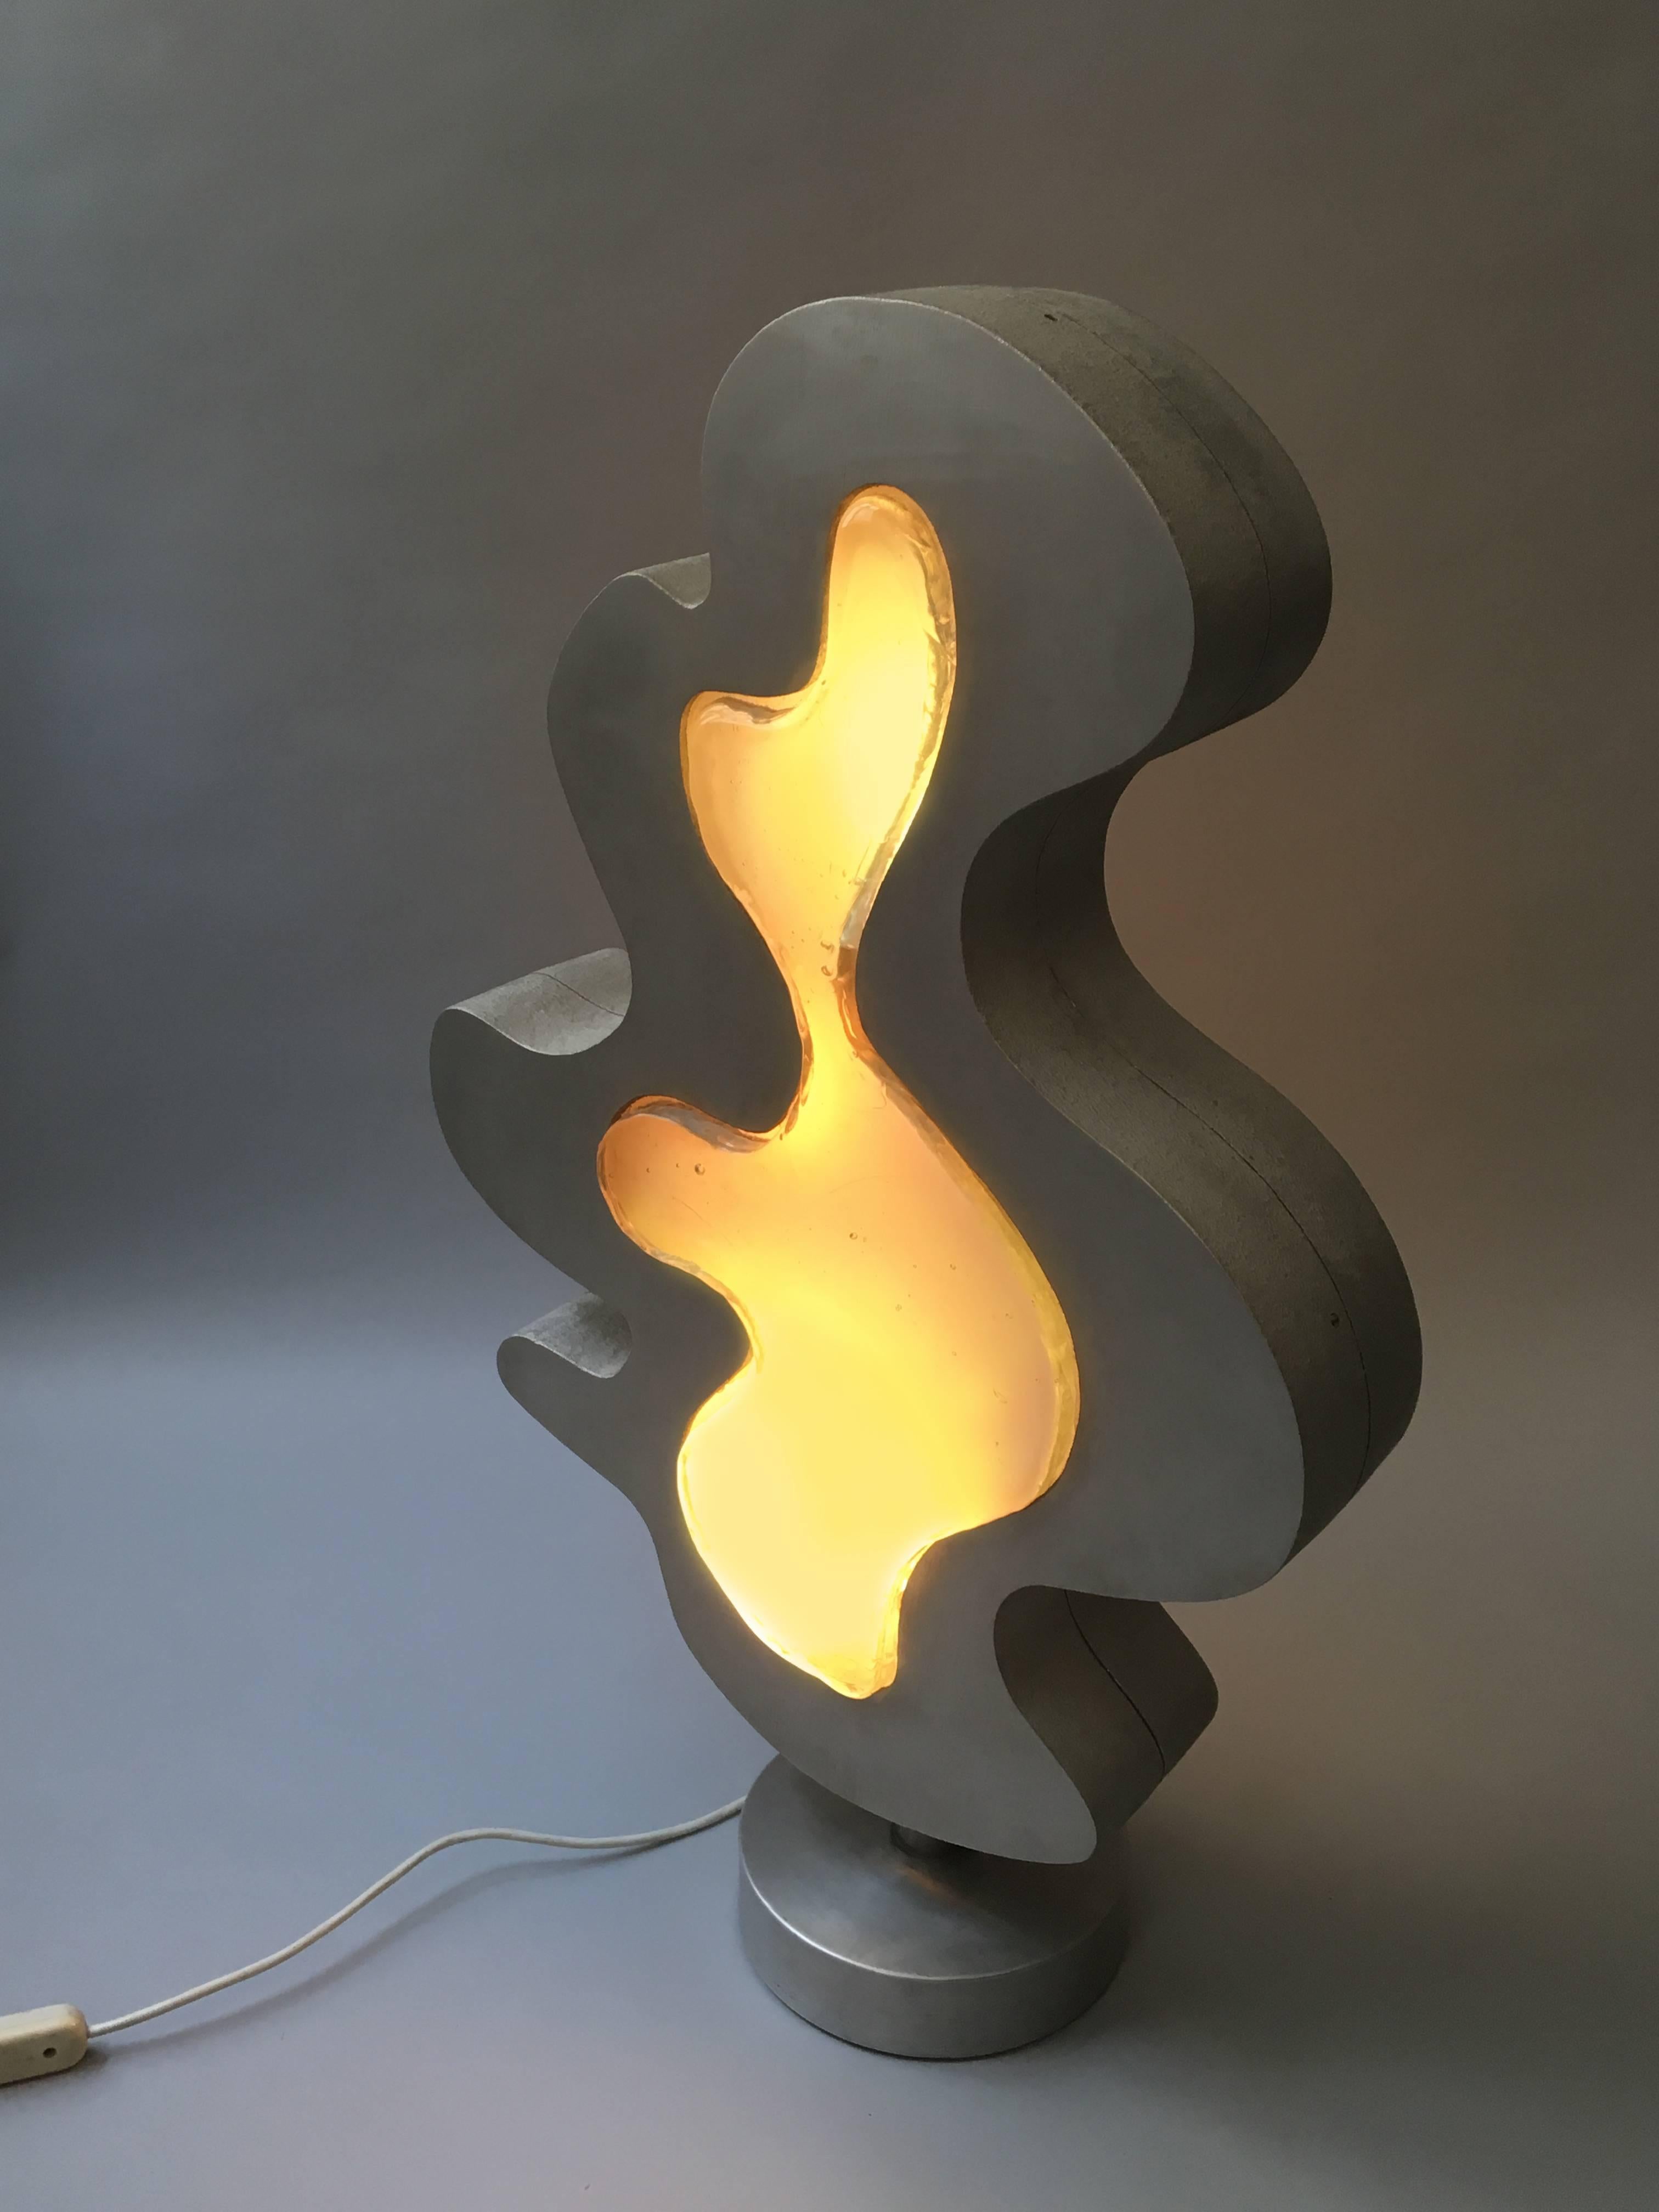 The Vegnusca light is part sculpture and part functional floor light. It is composed of two biomorphic shaped cast aluminum frames, two molded glass inserts and five internal lightbulb sockets. The cylinder shaped base is made of iron and cast